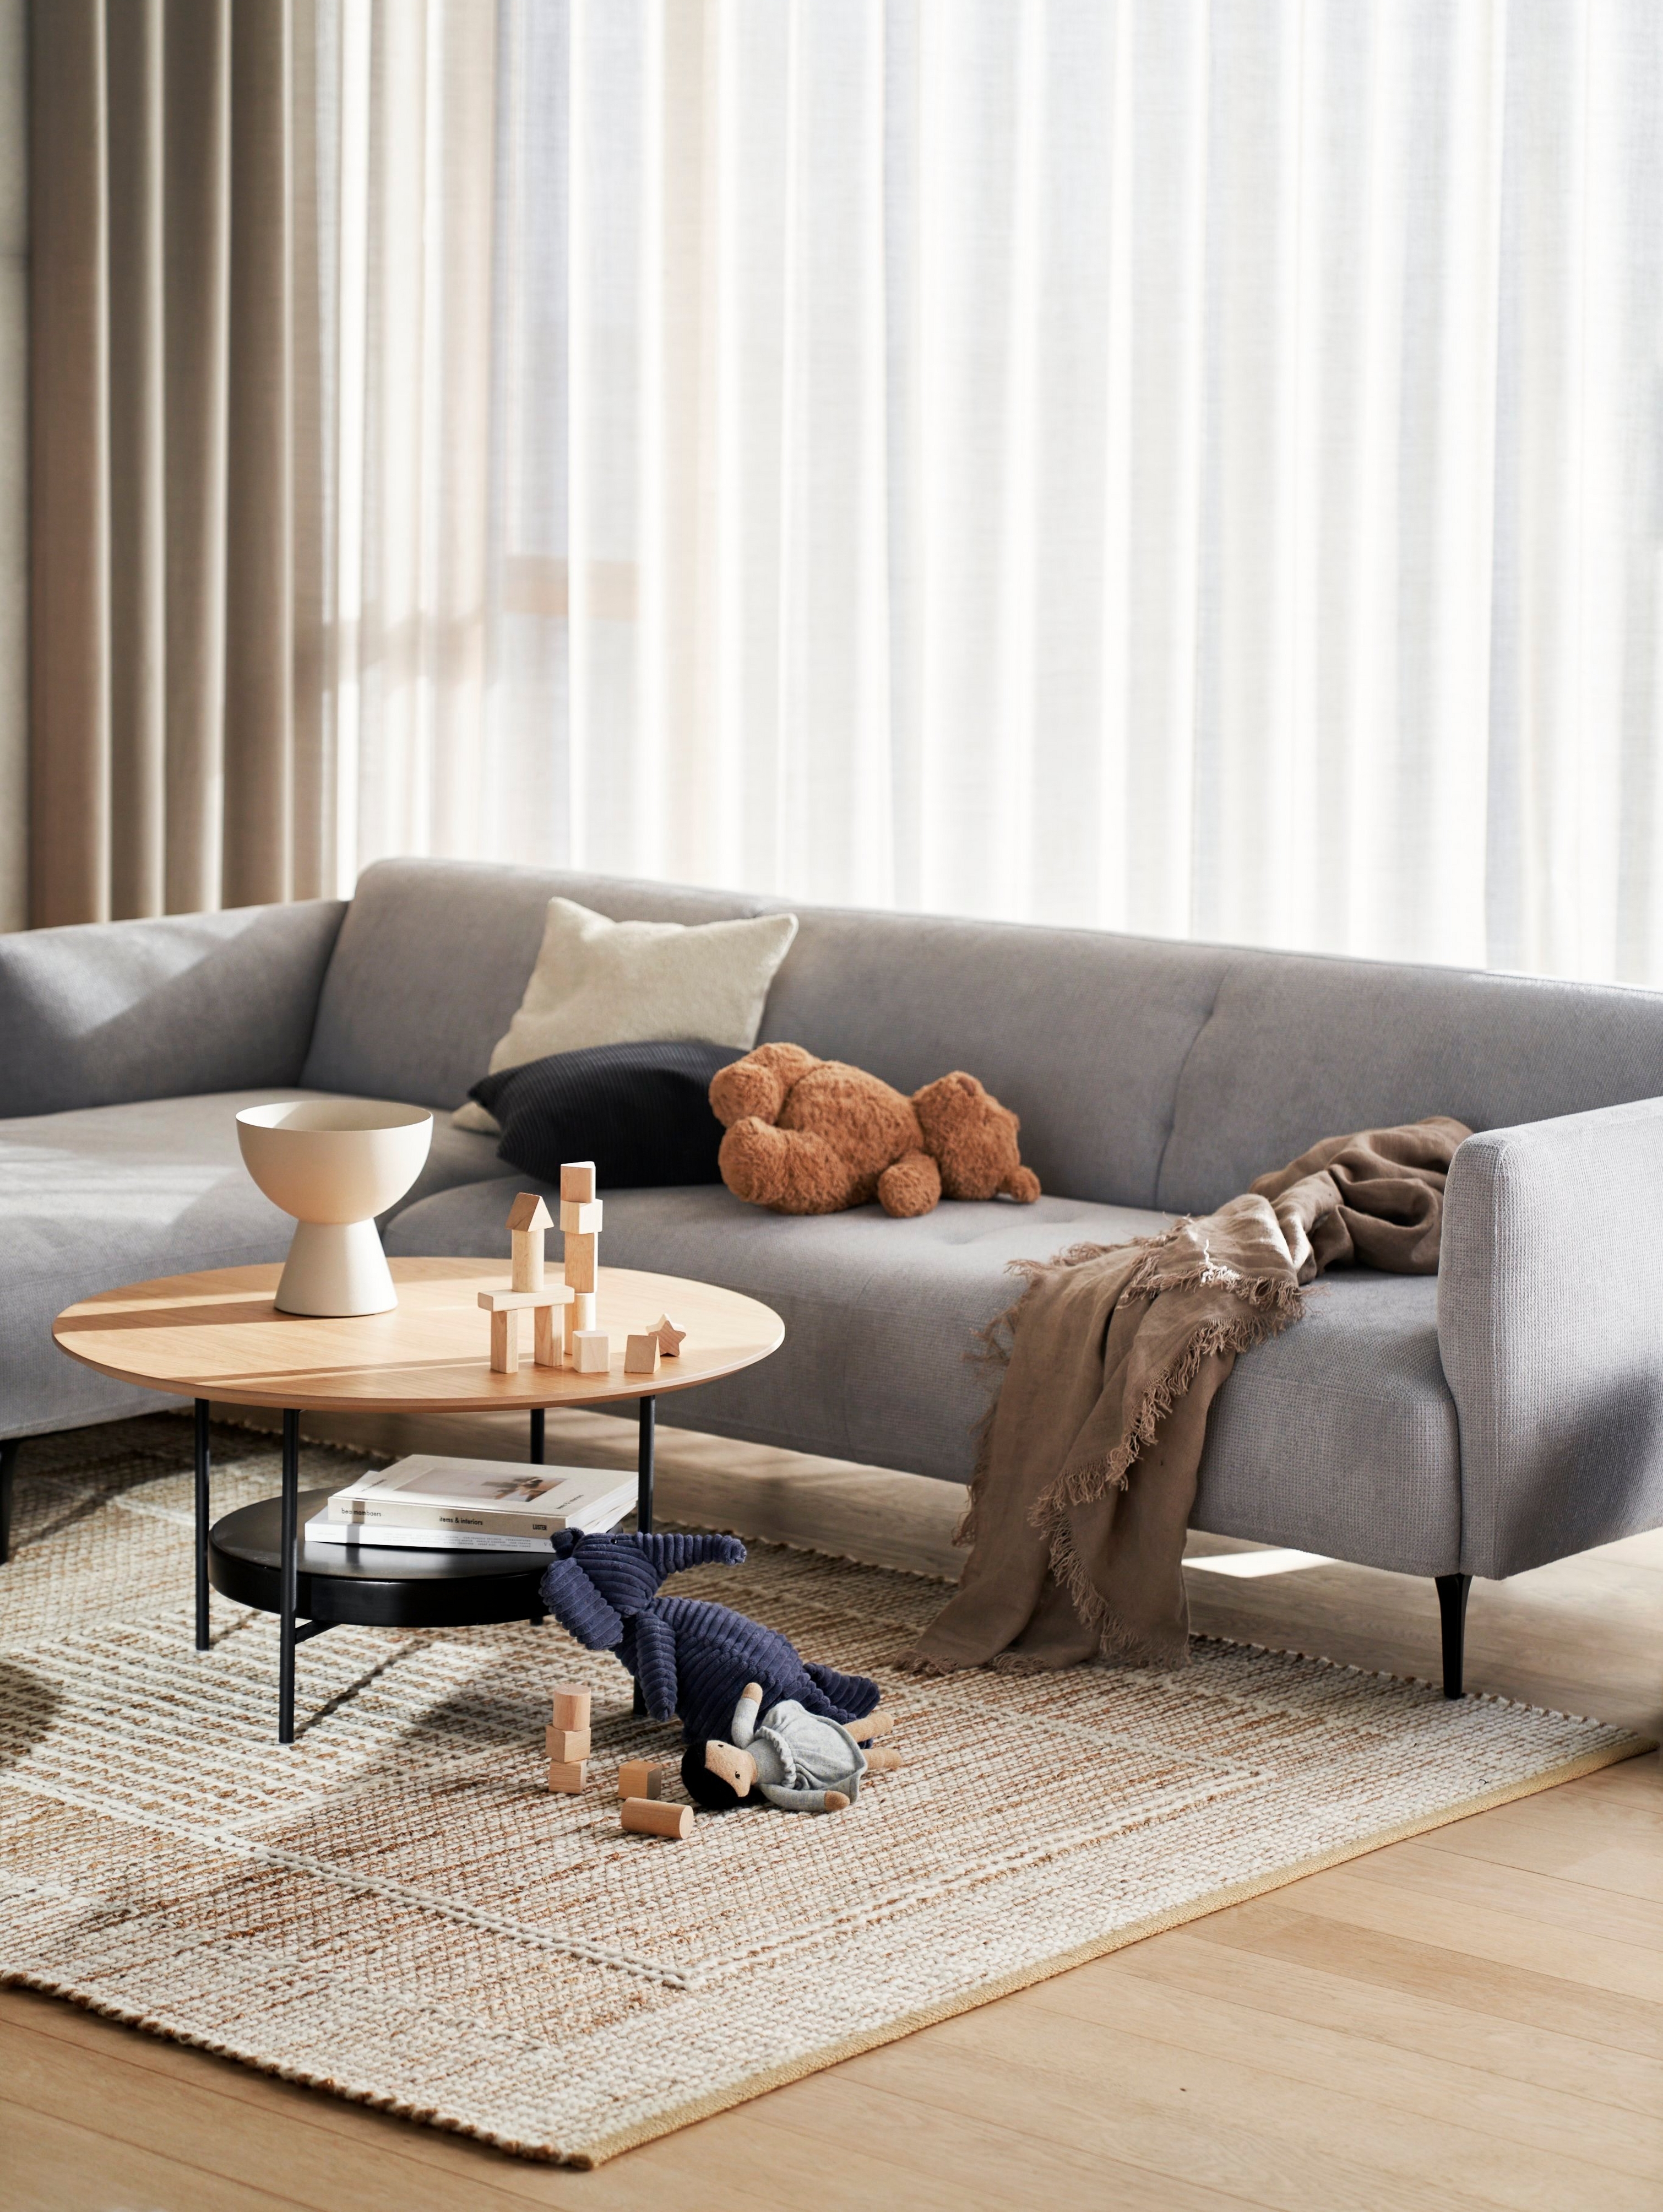 The Modena sofa in a cozy living room.